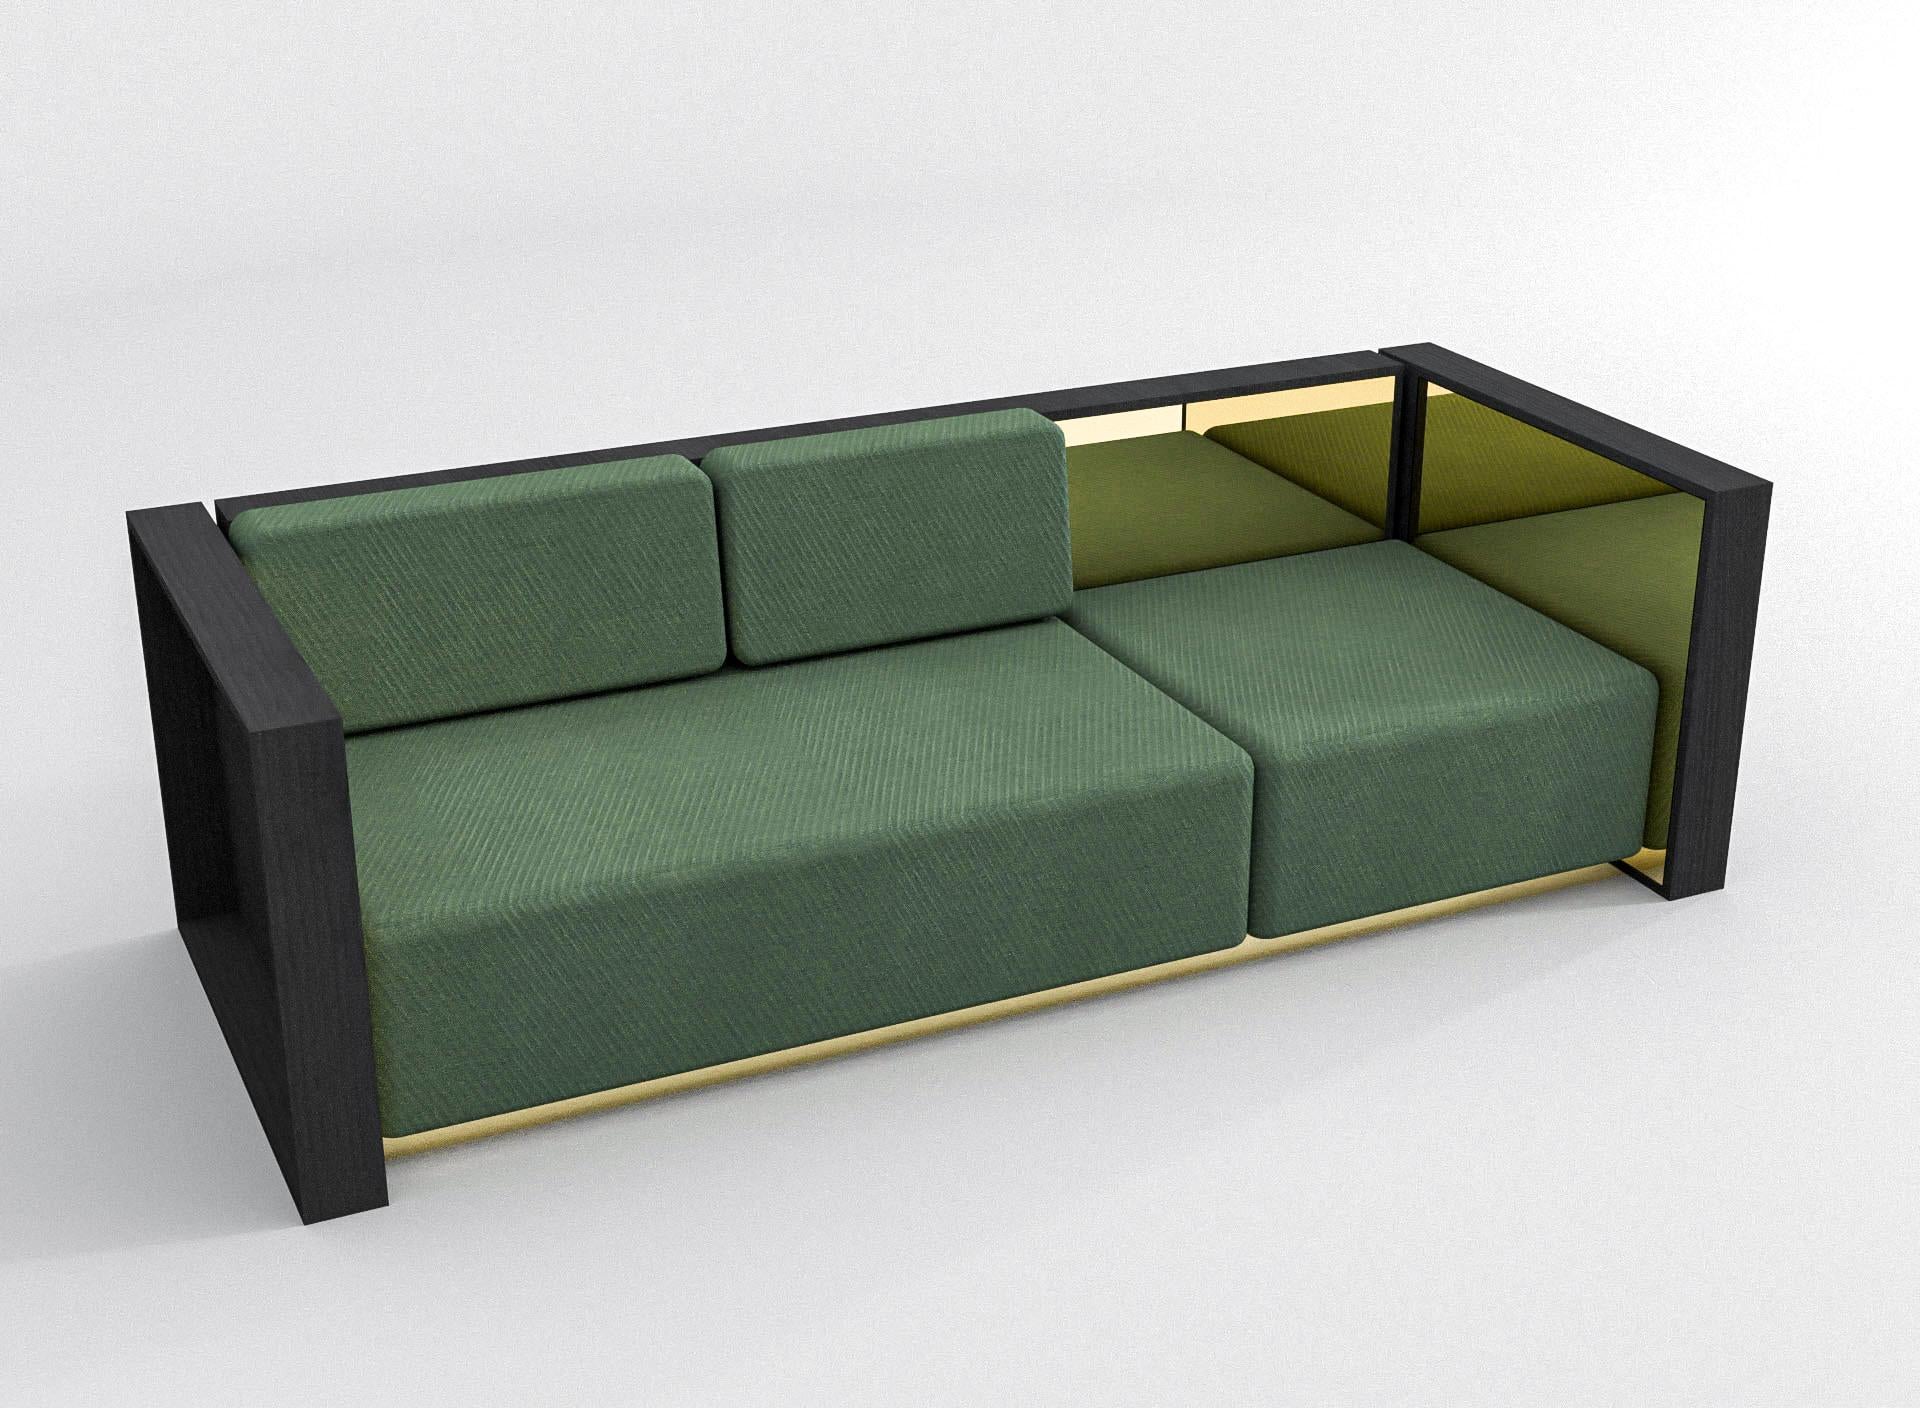 Barh Sofa in Black Stained Ash Wood, Brass and Green Upholstery, 3 Seater In New Condition For Sale In Antwerp, Antwerp